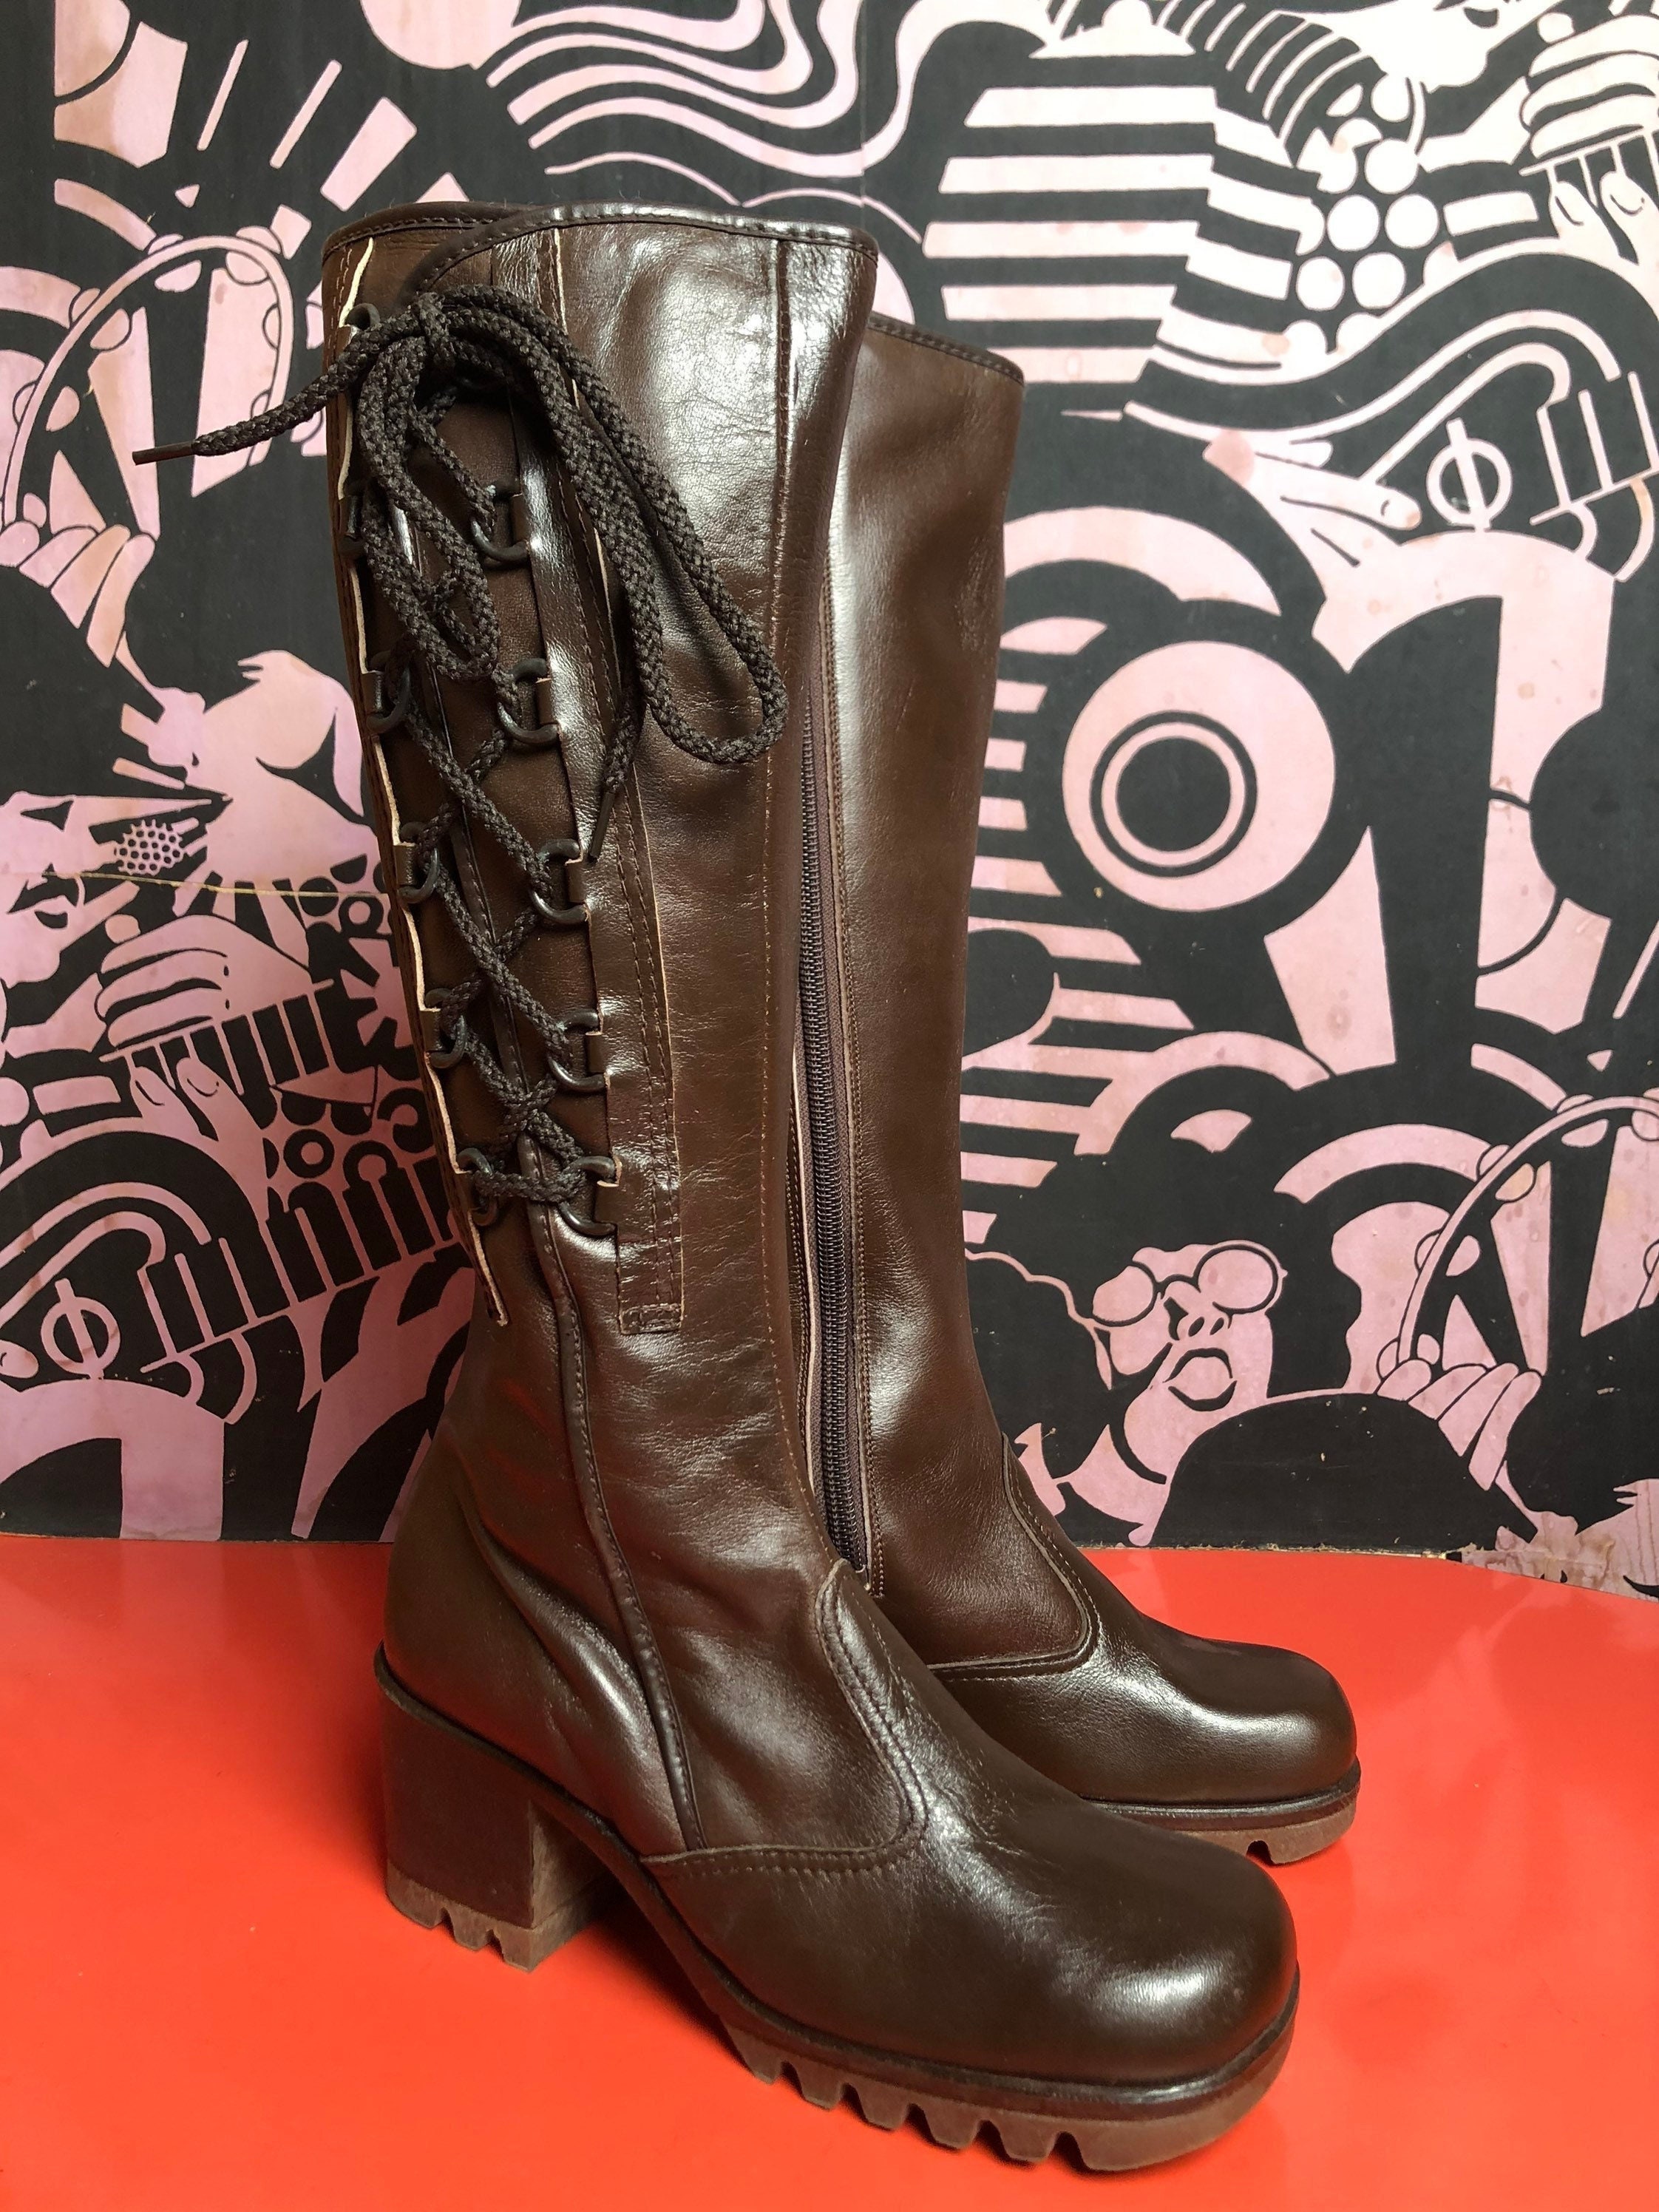 Gianni Bini Tall Black Leather Red Bottom Women's Boots size 6.5M